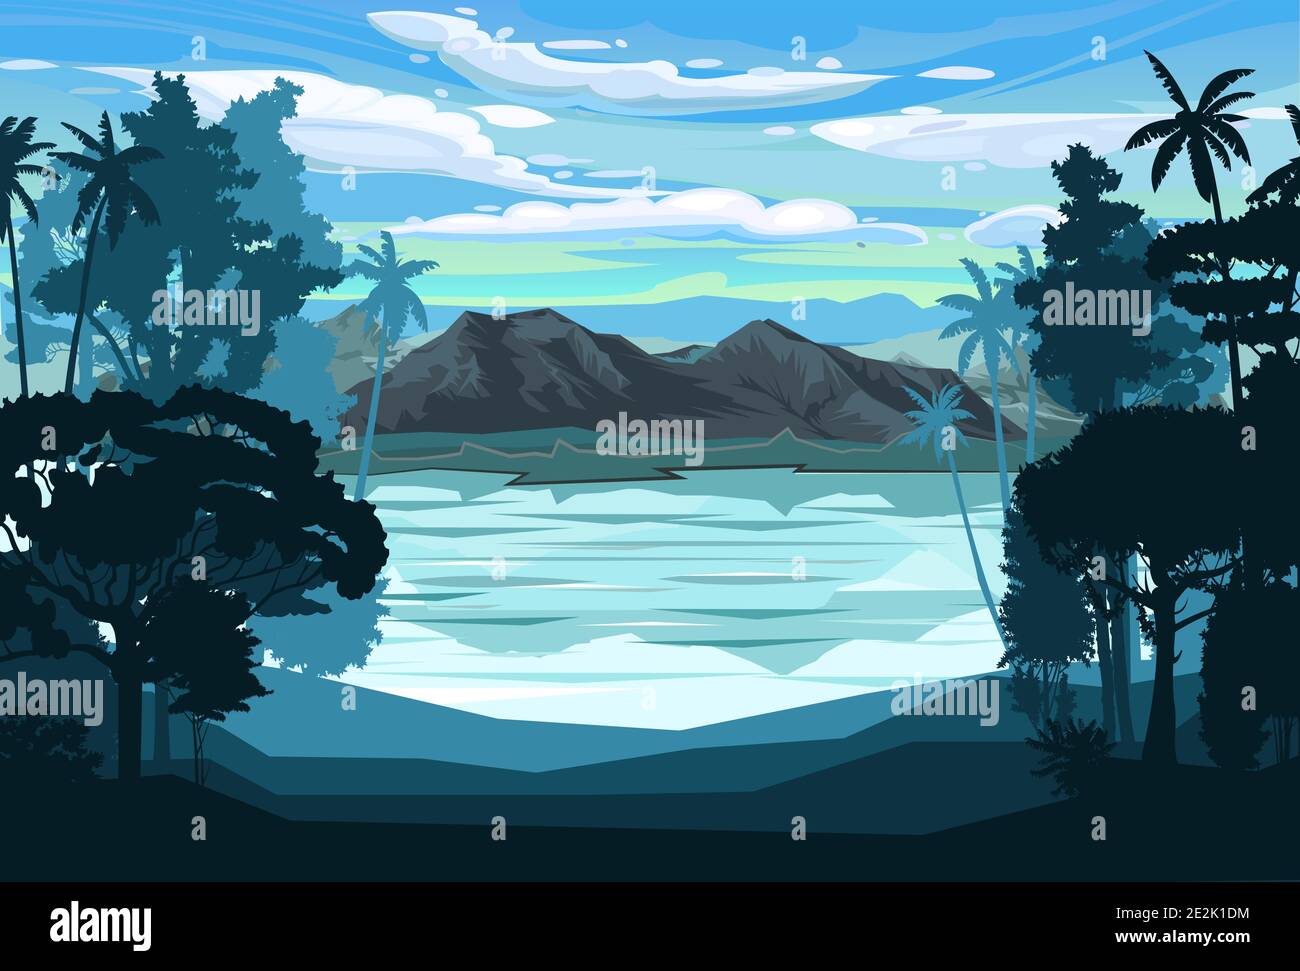 Mountain landscape. Mountain view through jungle and palms, rainforest. Silhouette. Lake, sea bay. Mountains, rocks on the horizon. Sky with clouds Stock Vector